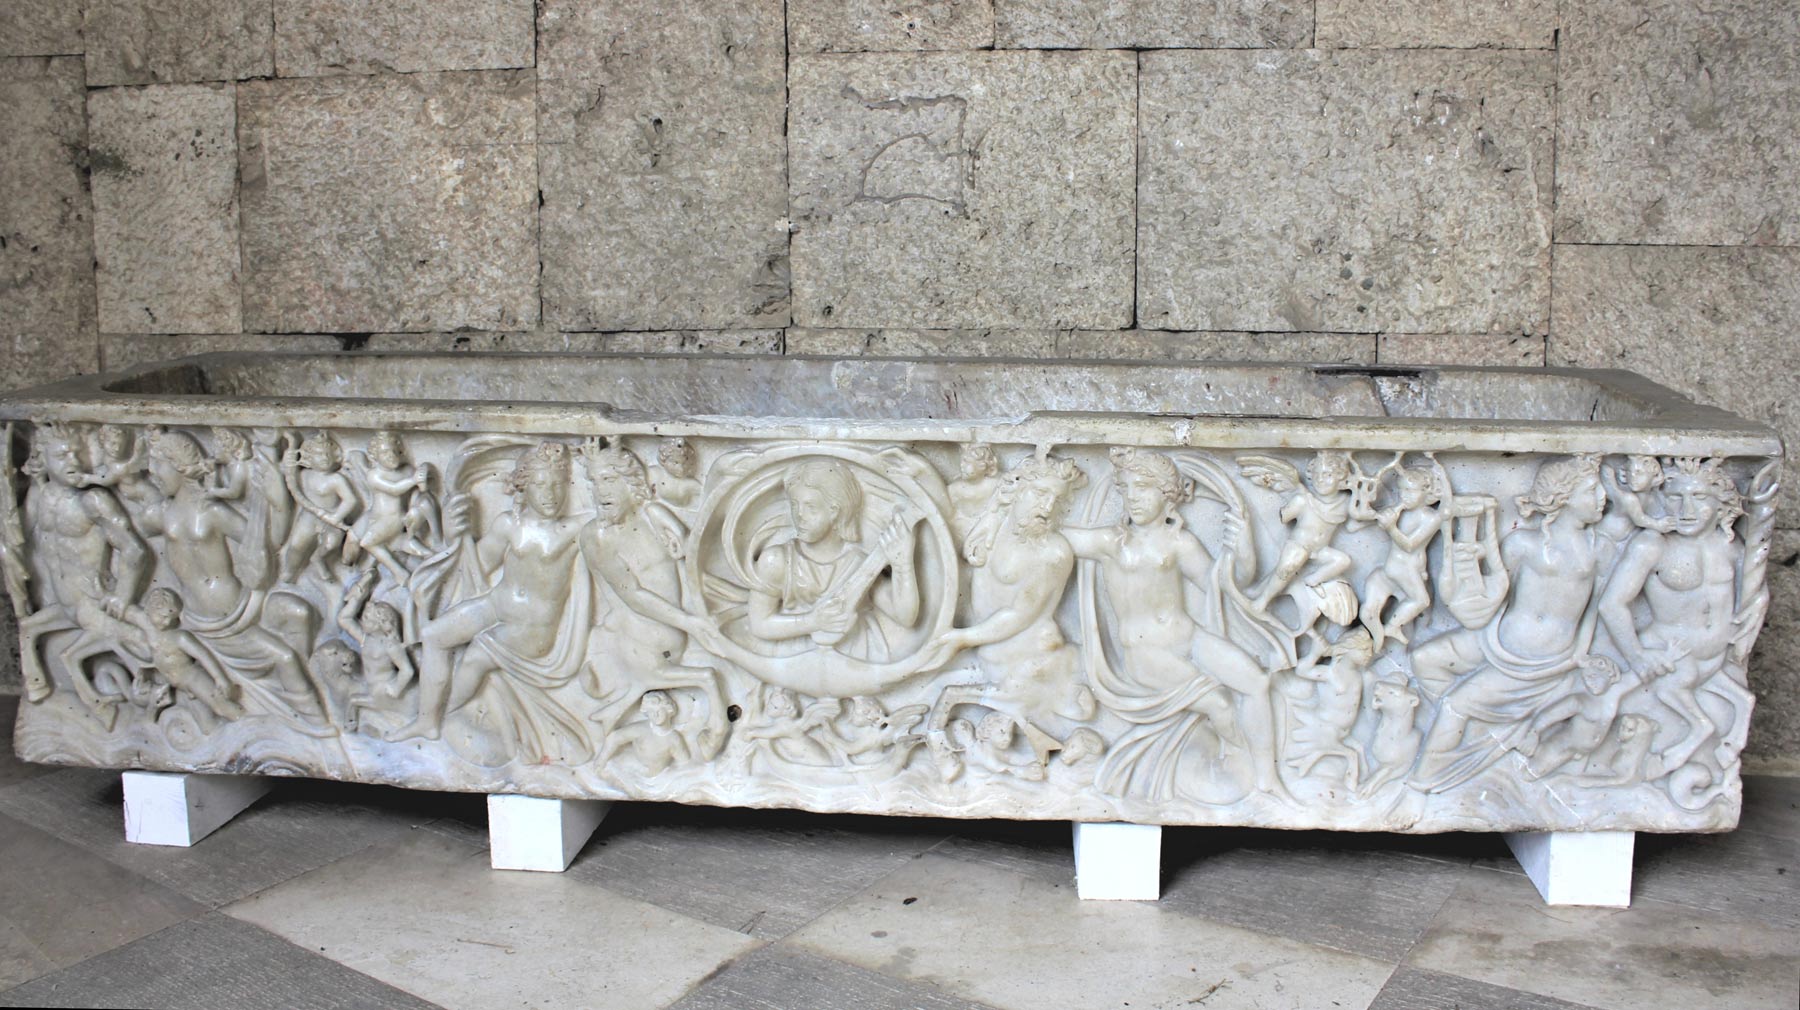 Roman art, Sarcophagus of the Nereids (3rd century AD; marble; Cagliari, National Archaeological Museum).